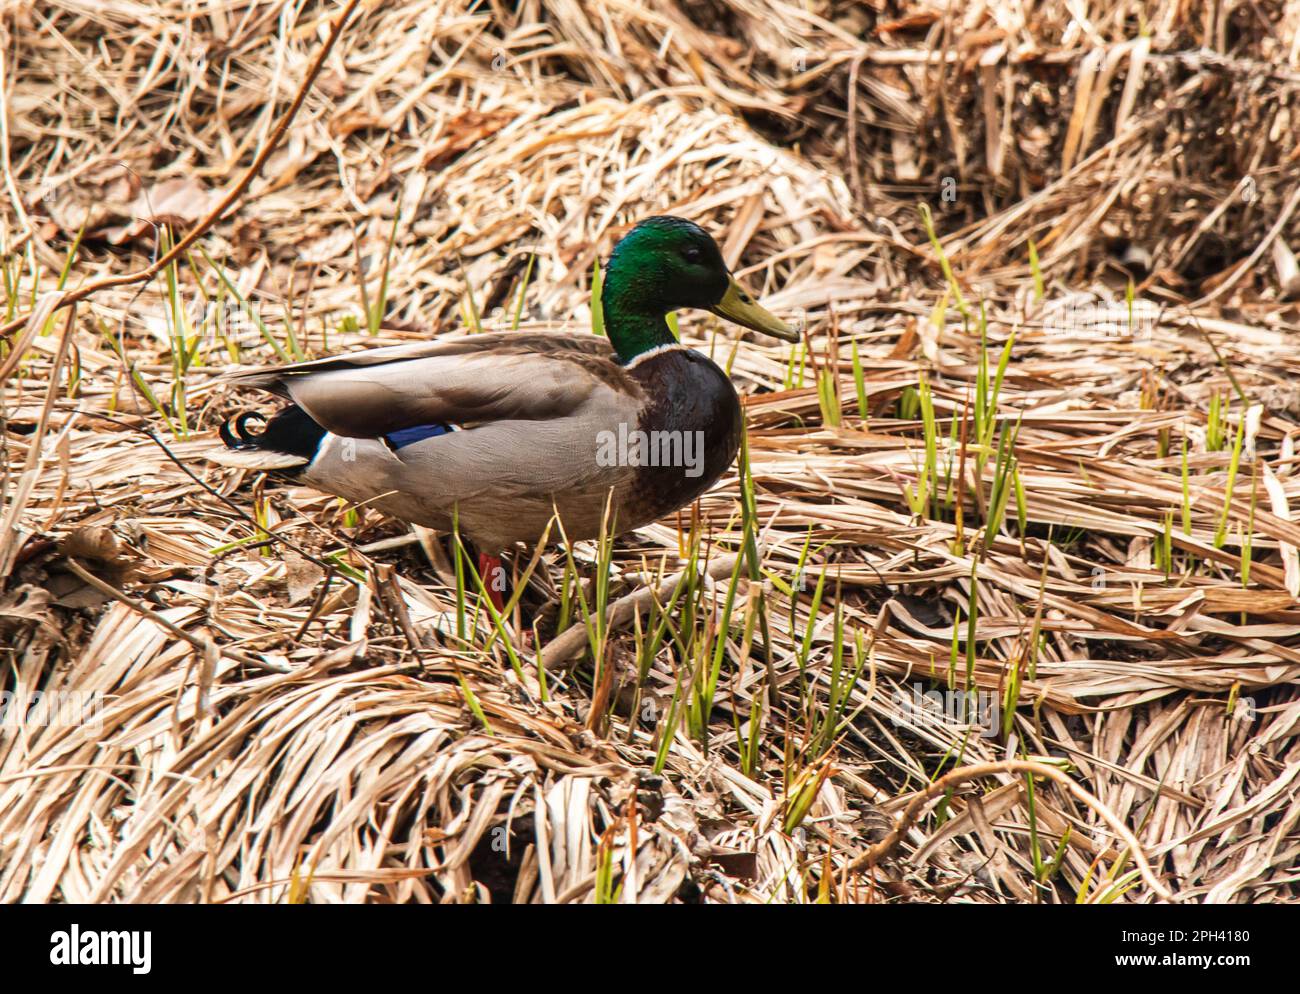 Colorful Male Mallard duck at water's edge, dried grass and spring shoots.  Bright green head, purple feathers on side. Stock Photo